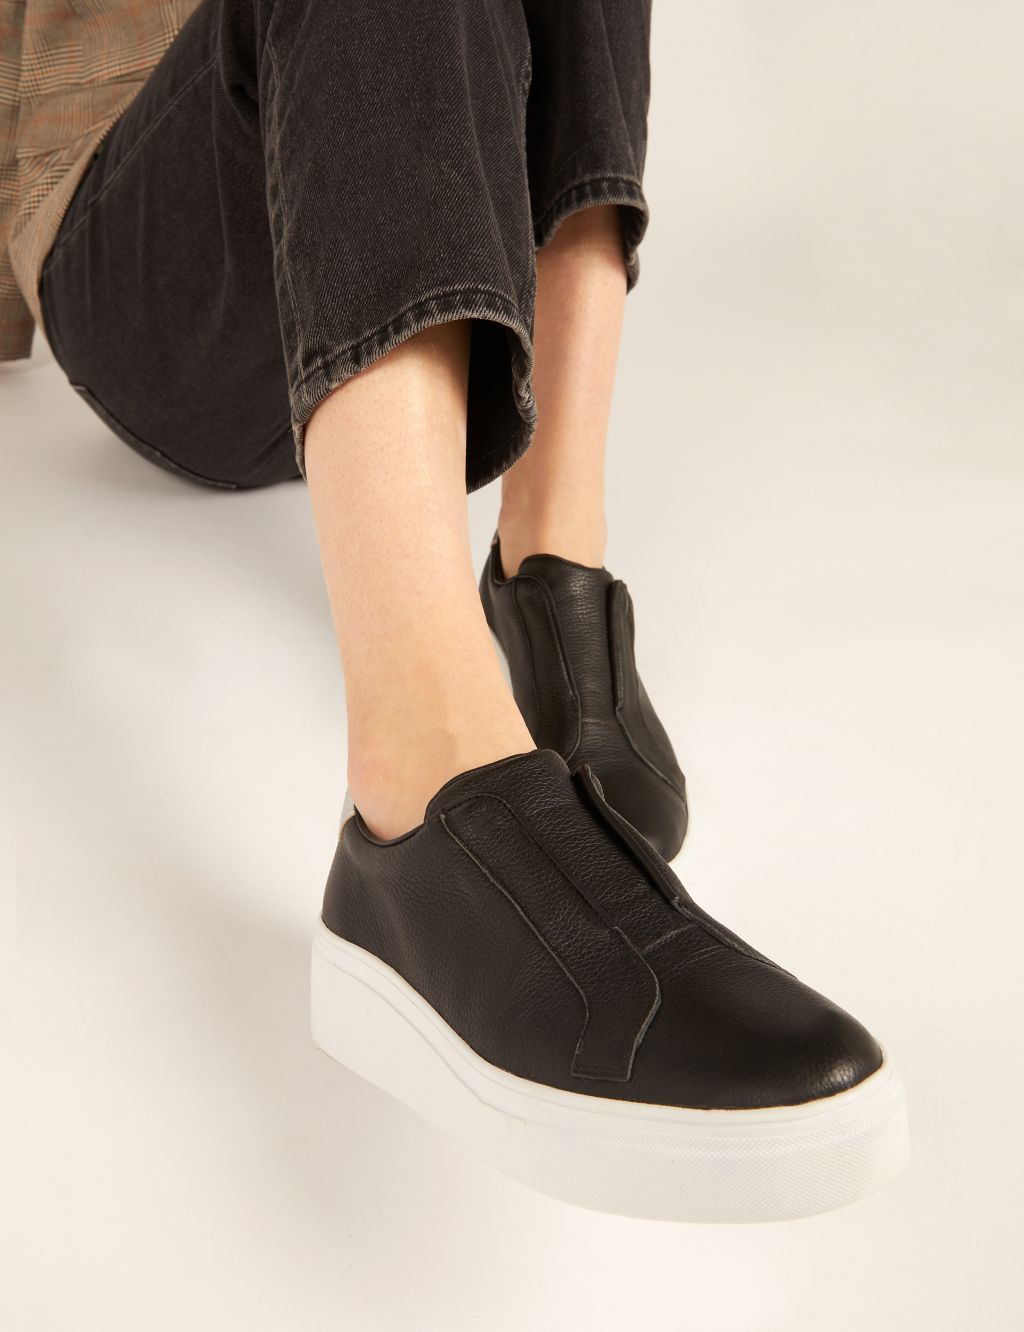 Leather Slip On Trainers image 1